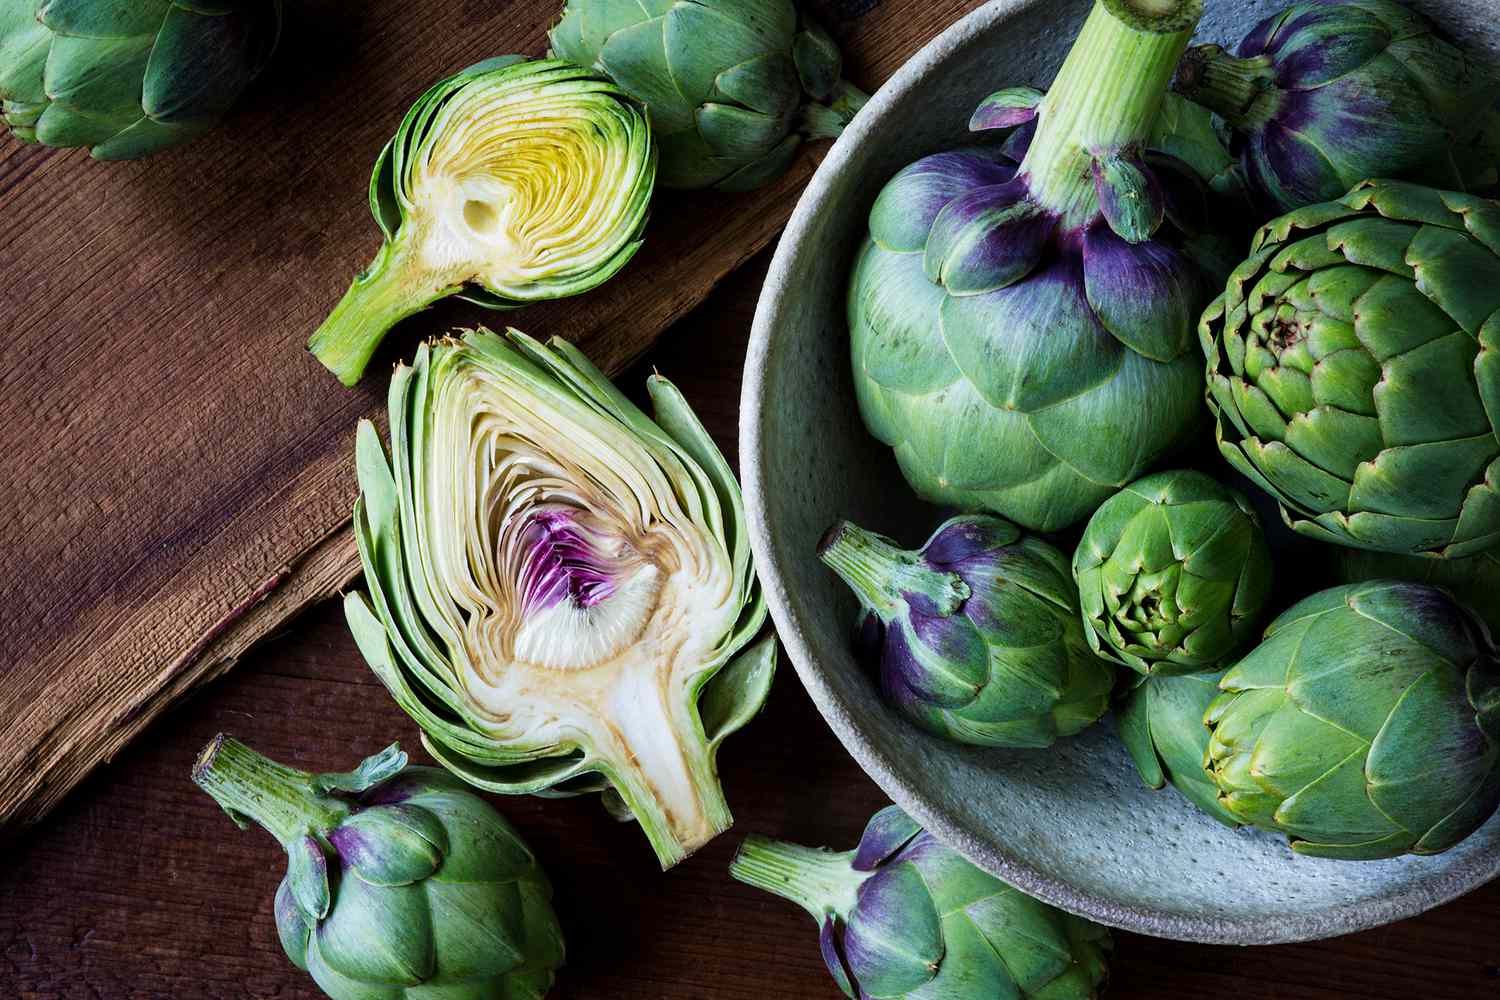 Artichokes on a wood surface and in a bowl